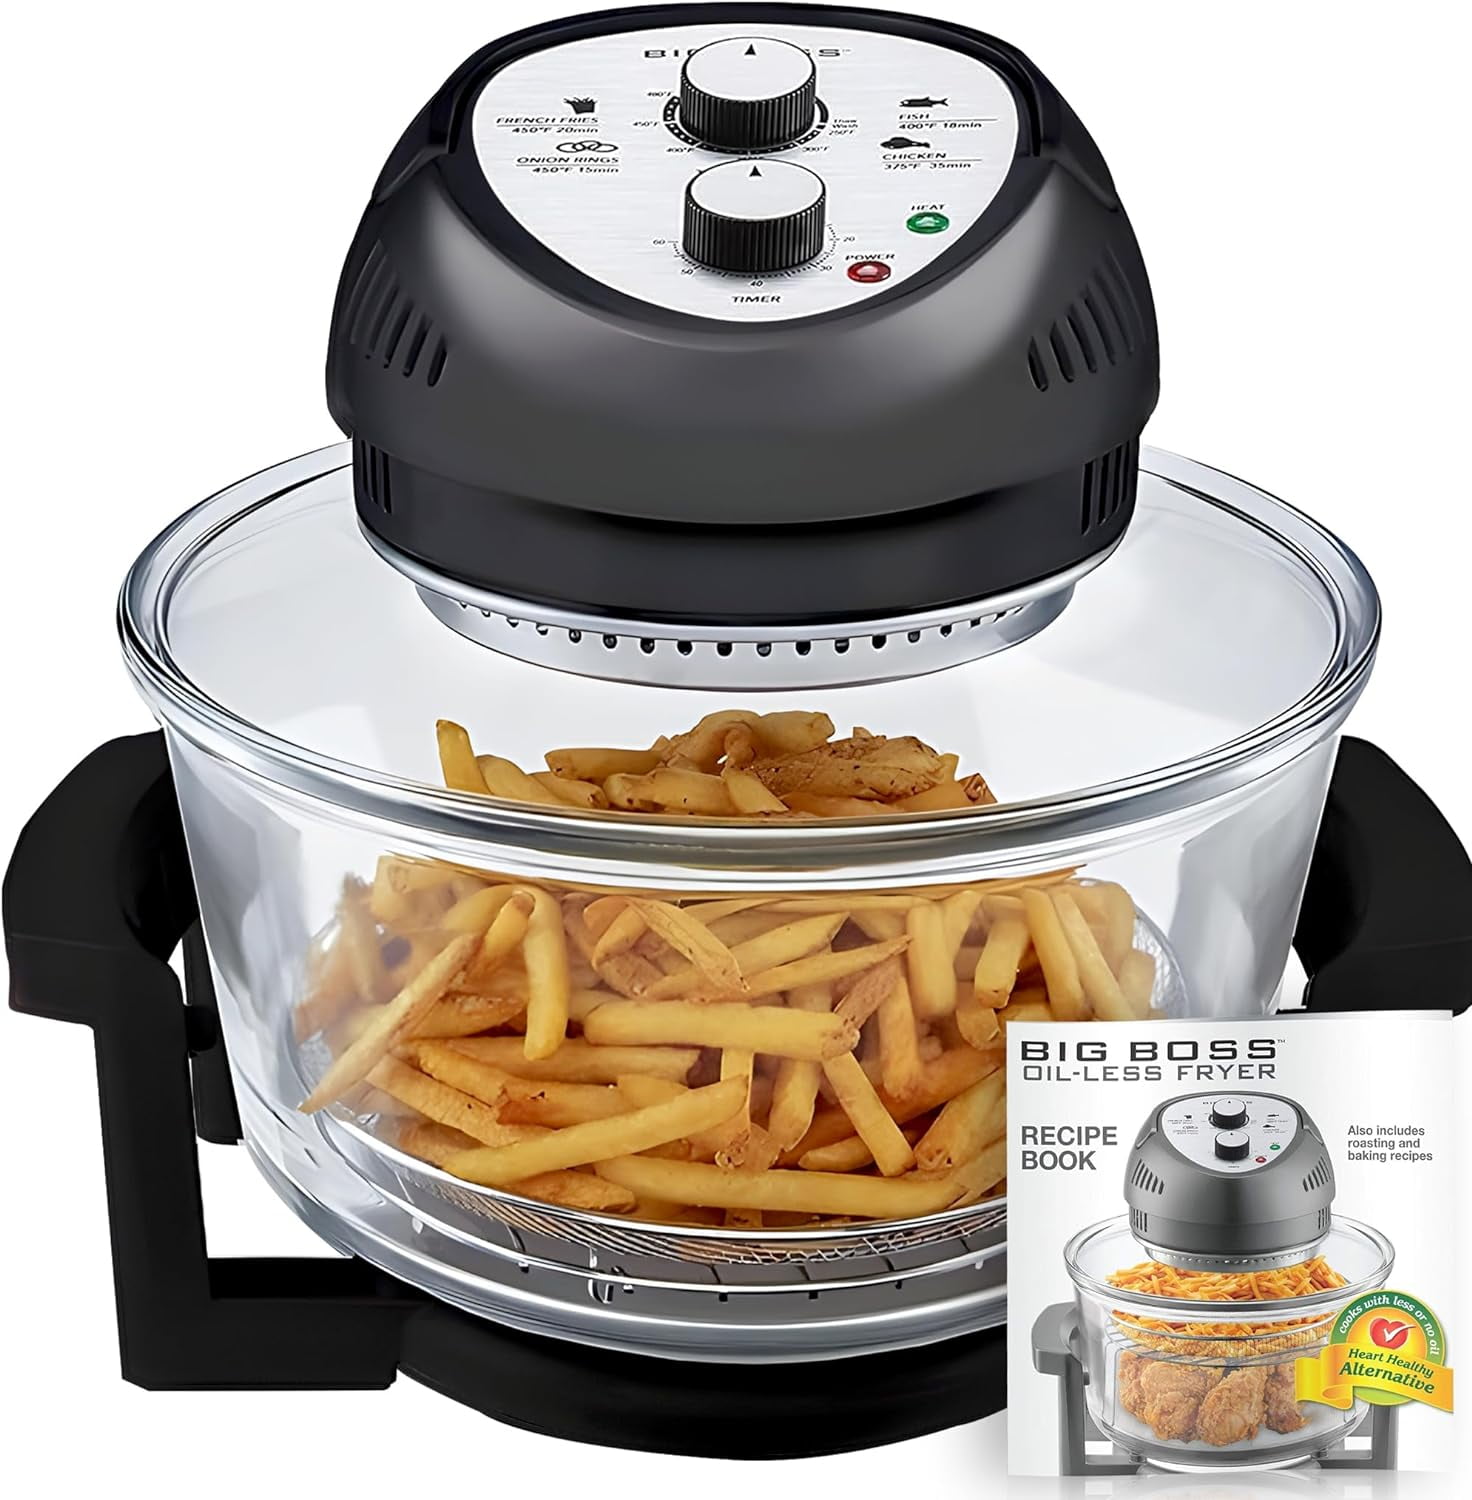 Why You Should Avoid The Big Boss Air Fryer